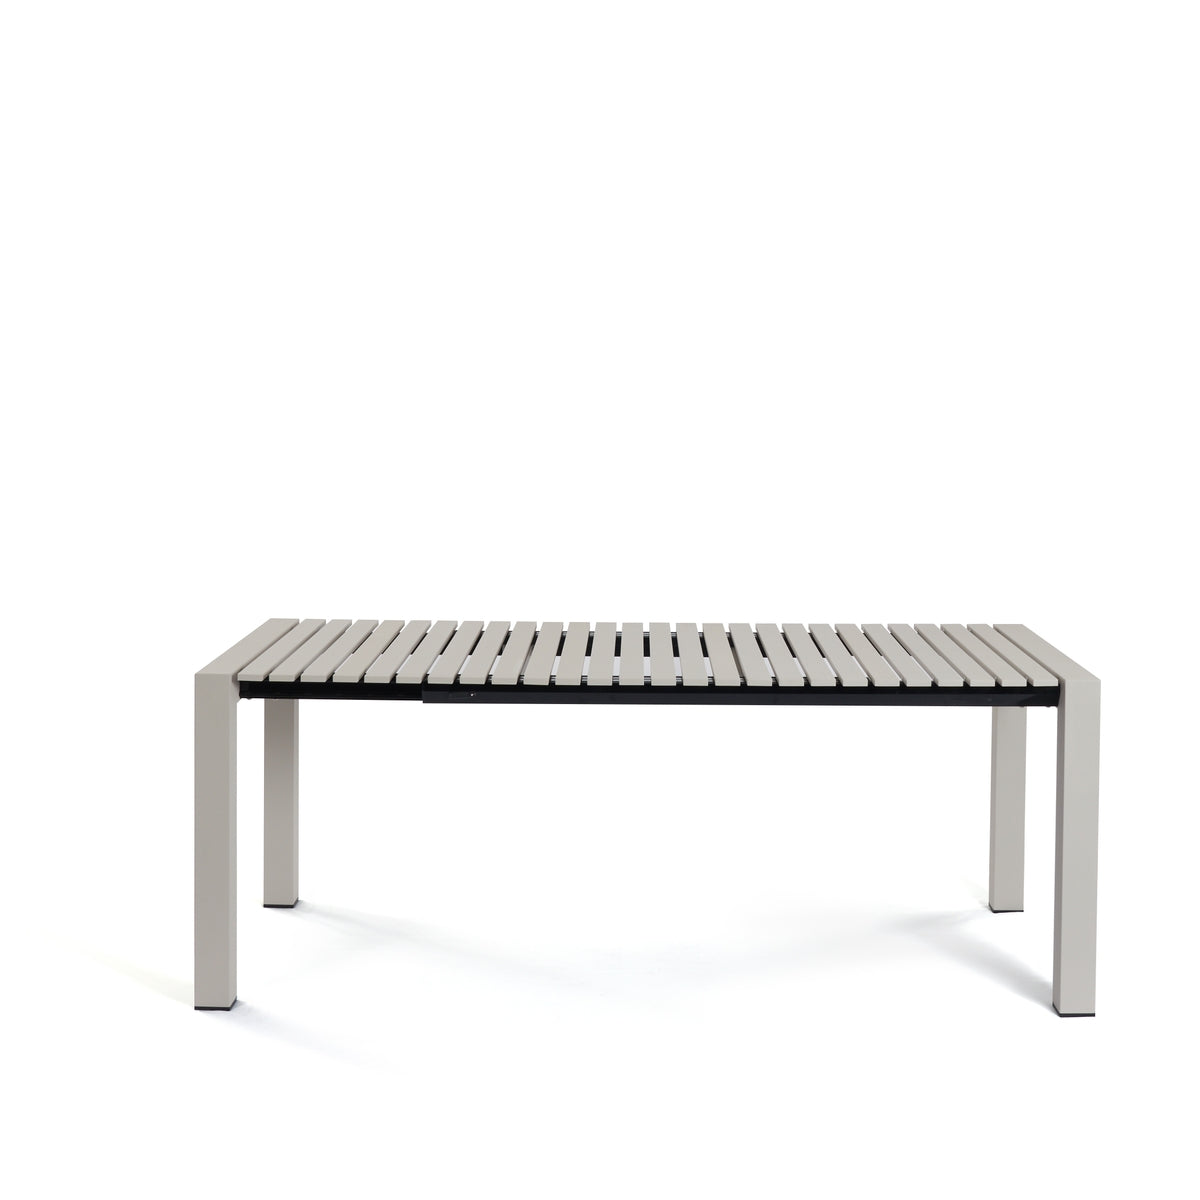 Mindo | 111 Dining table extension